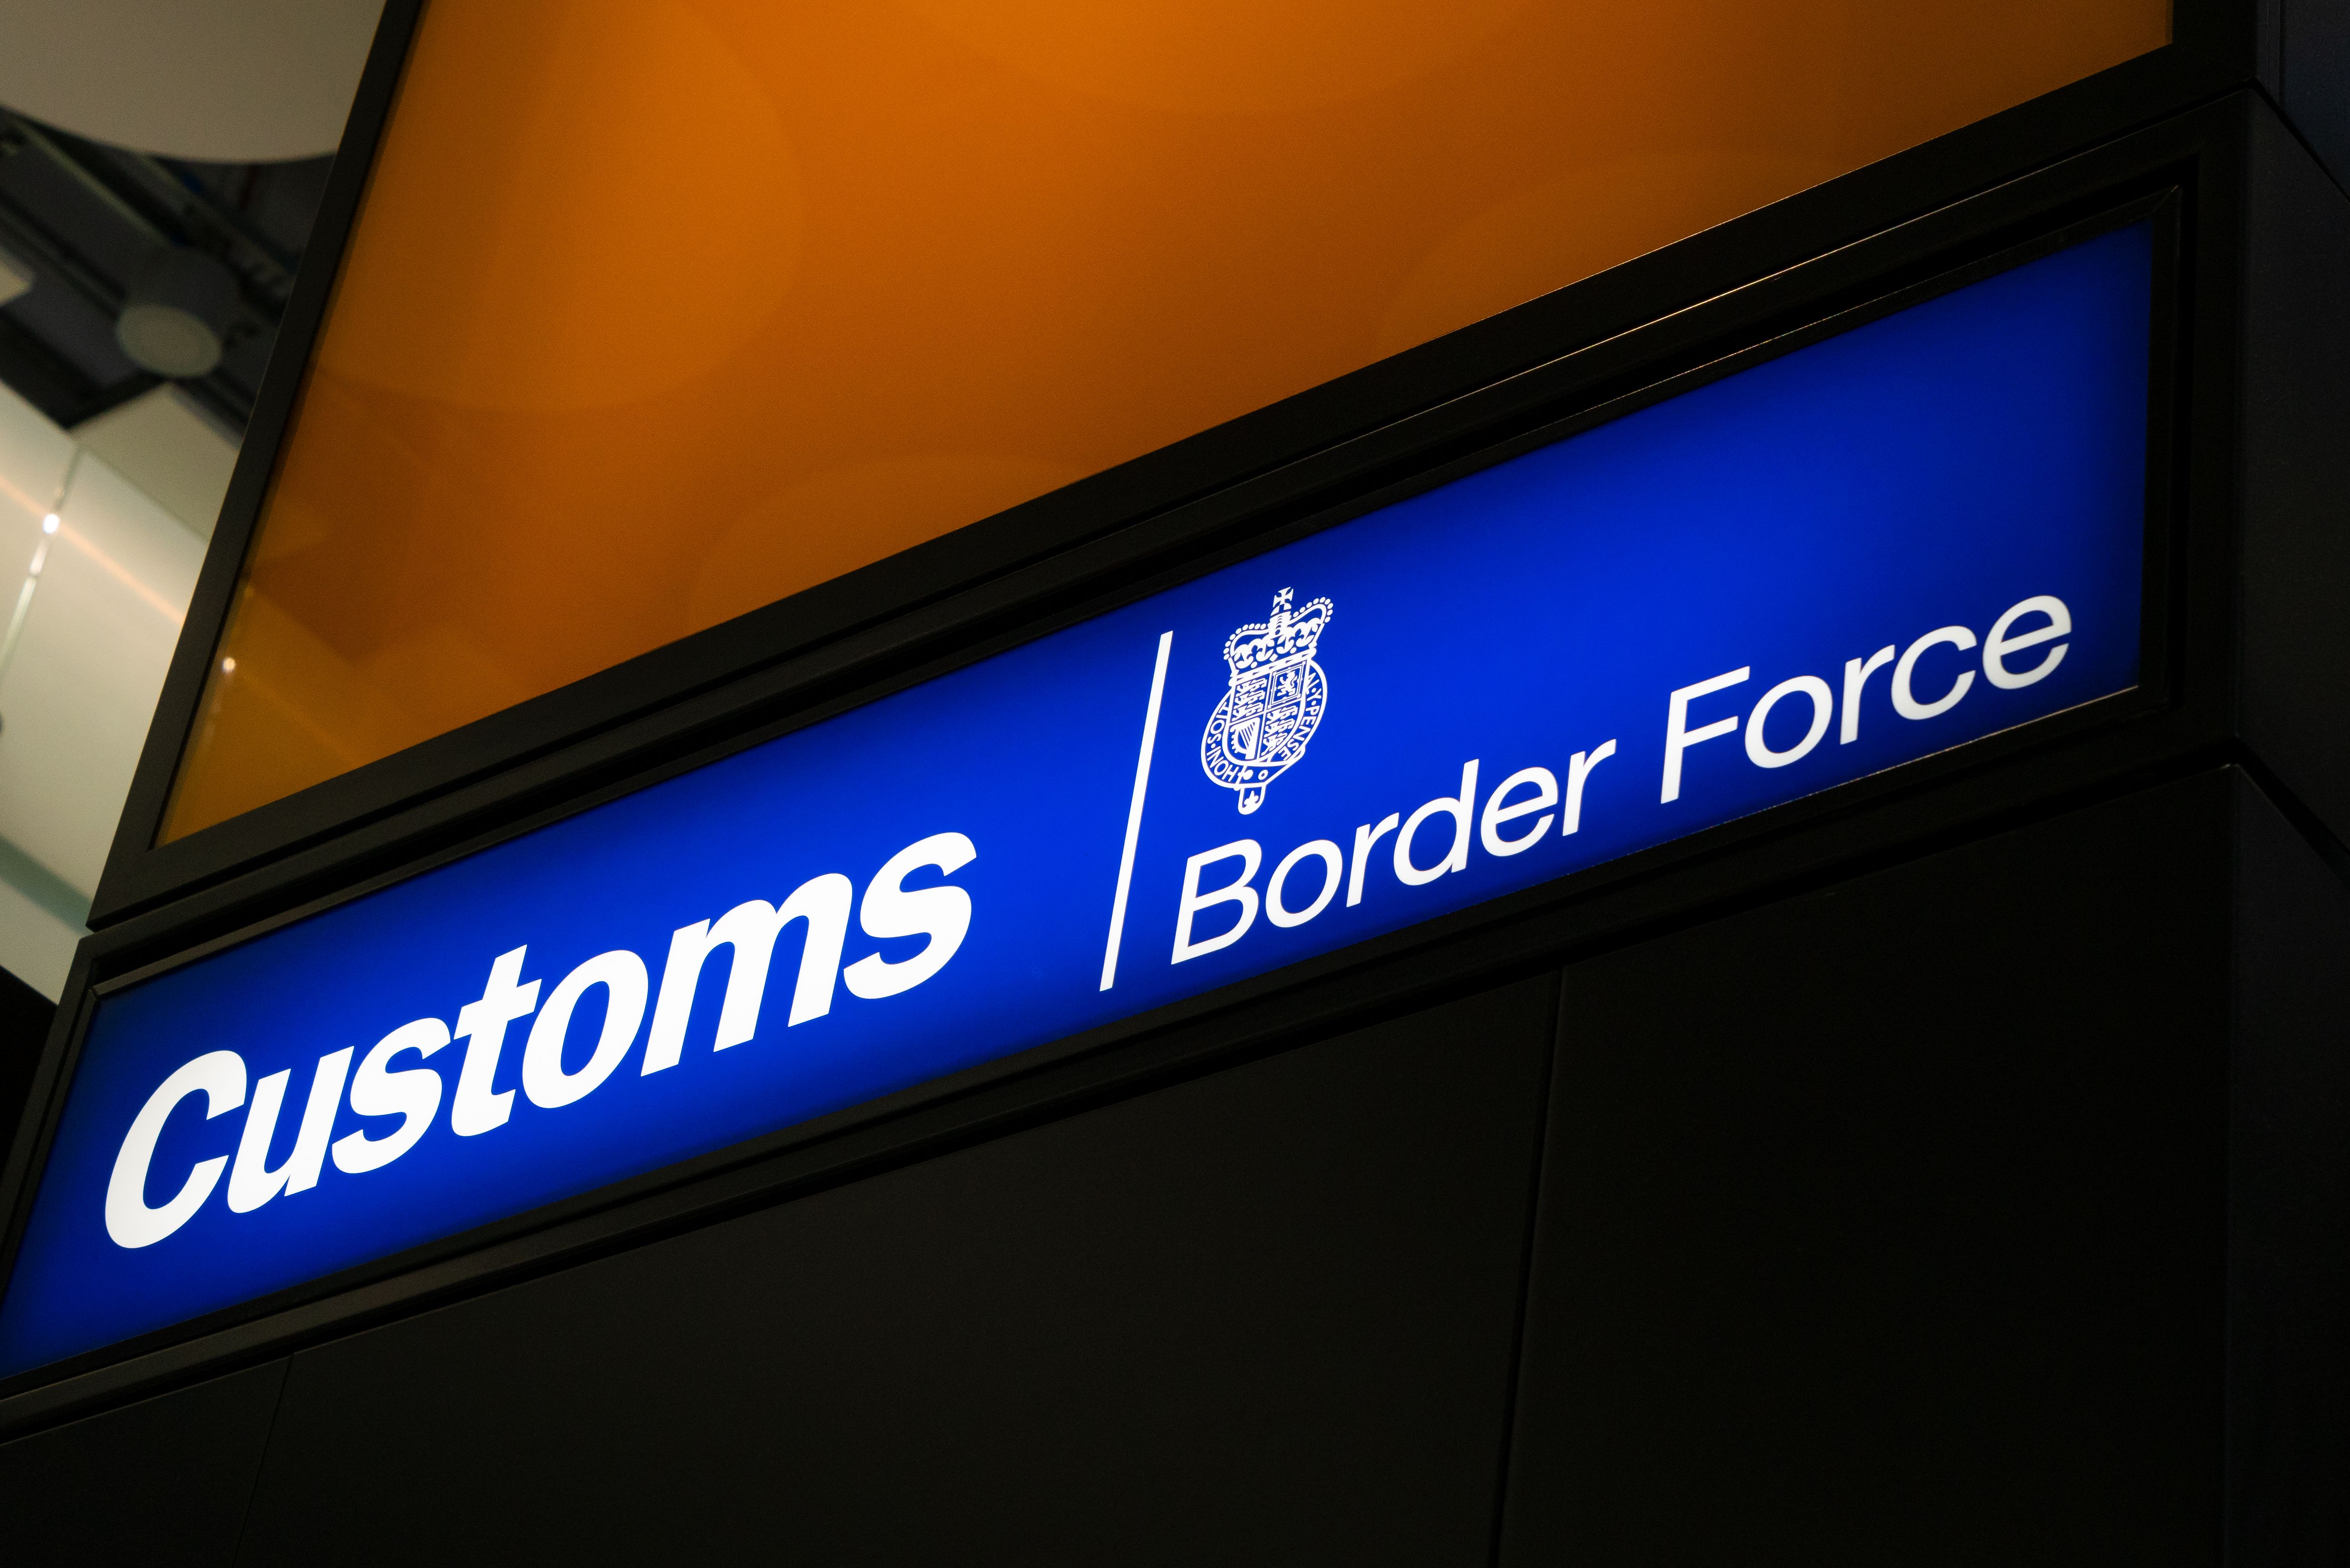 UK Customs and Border Force